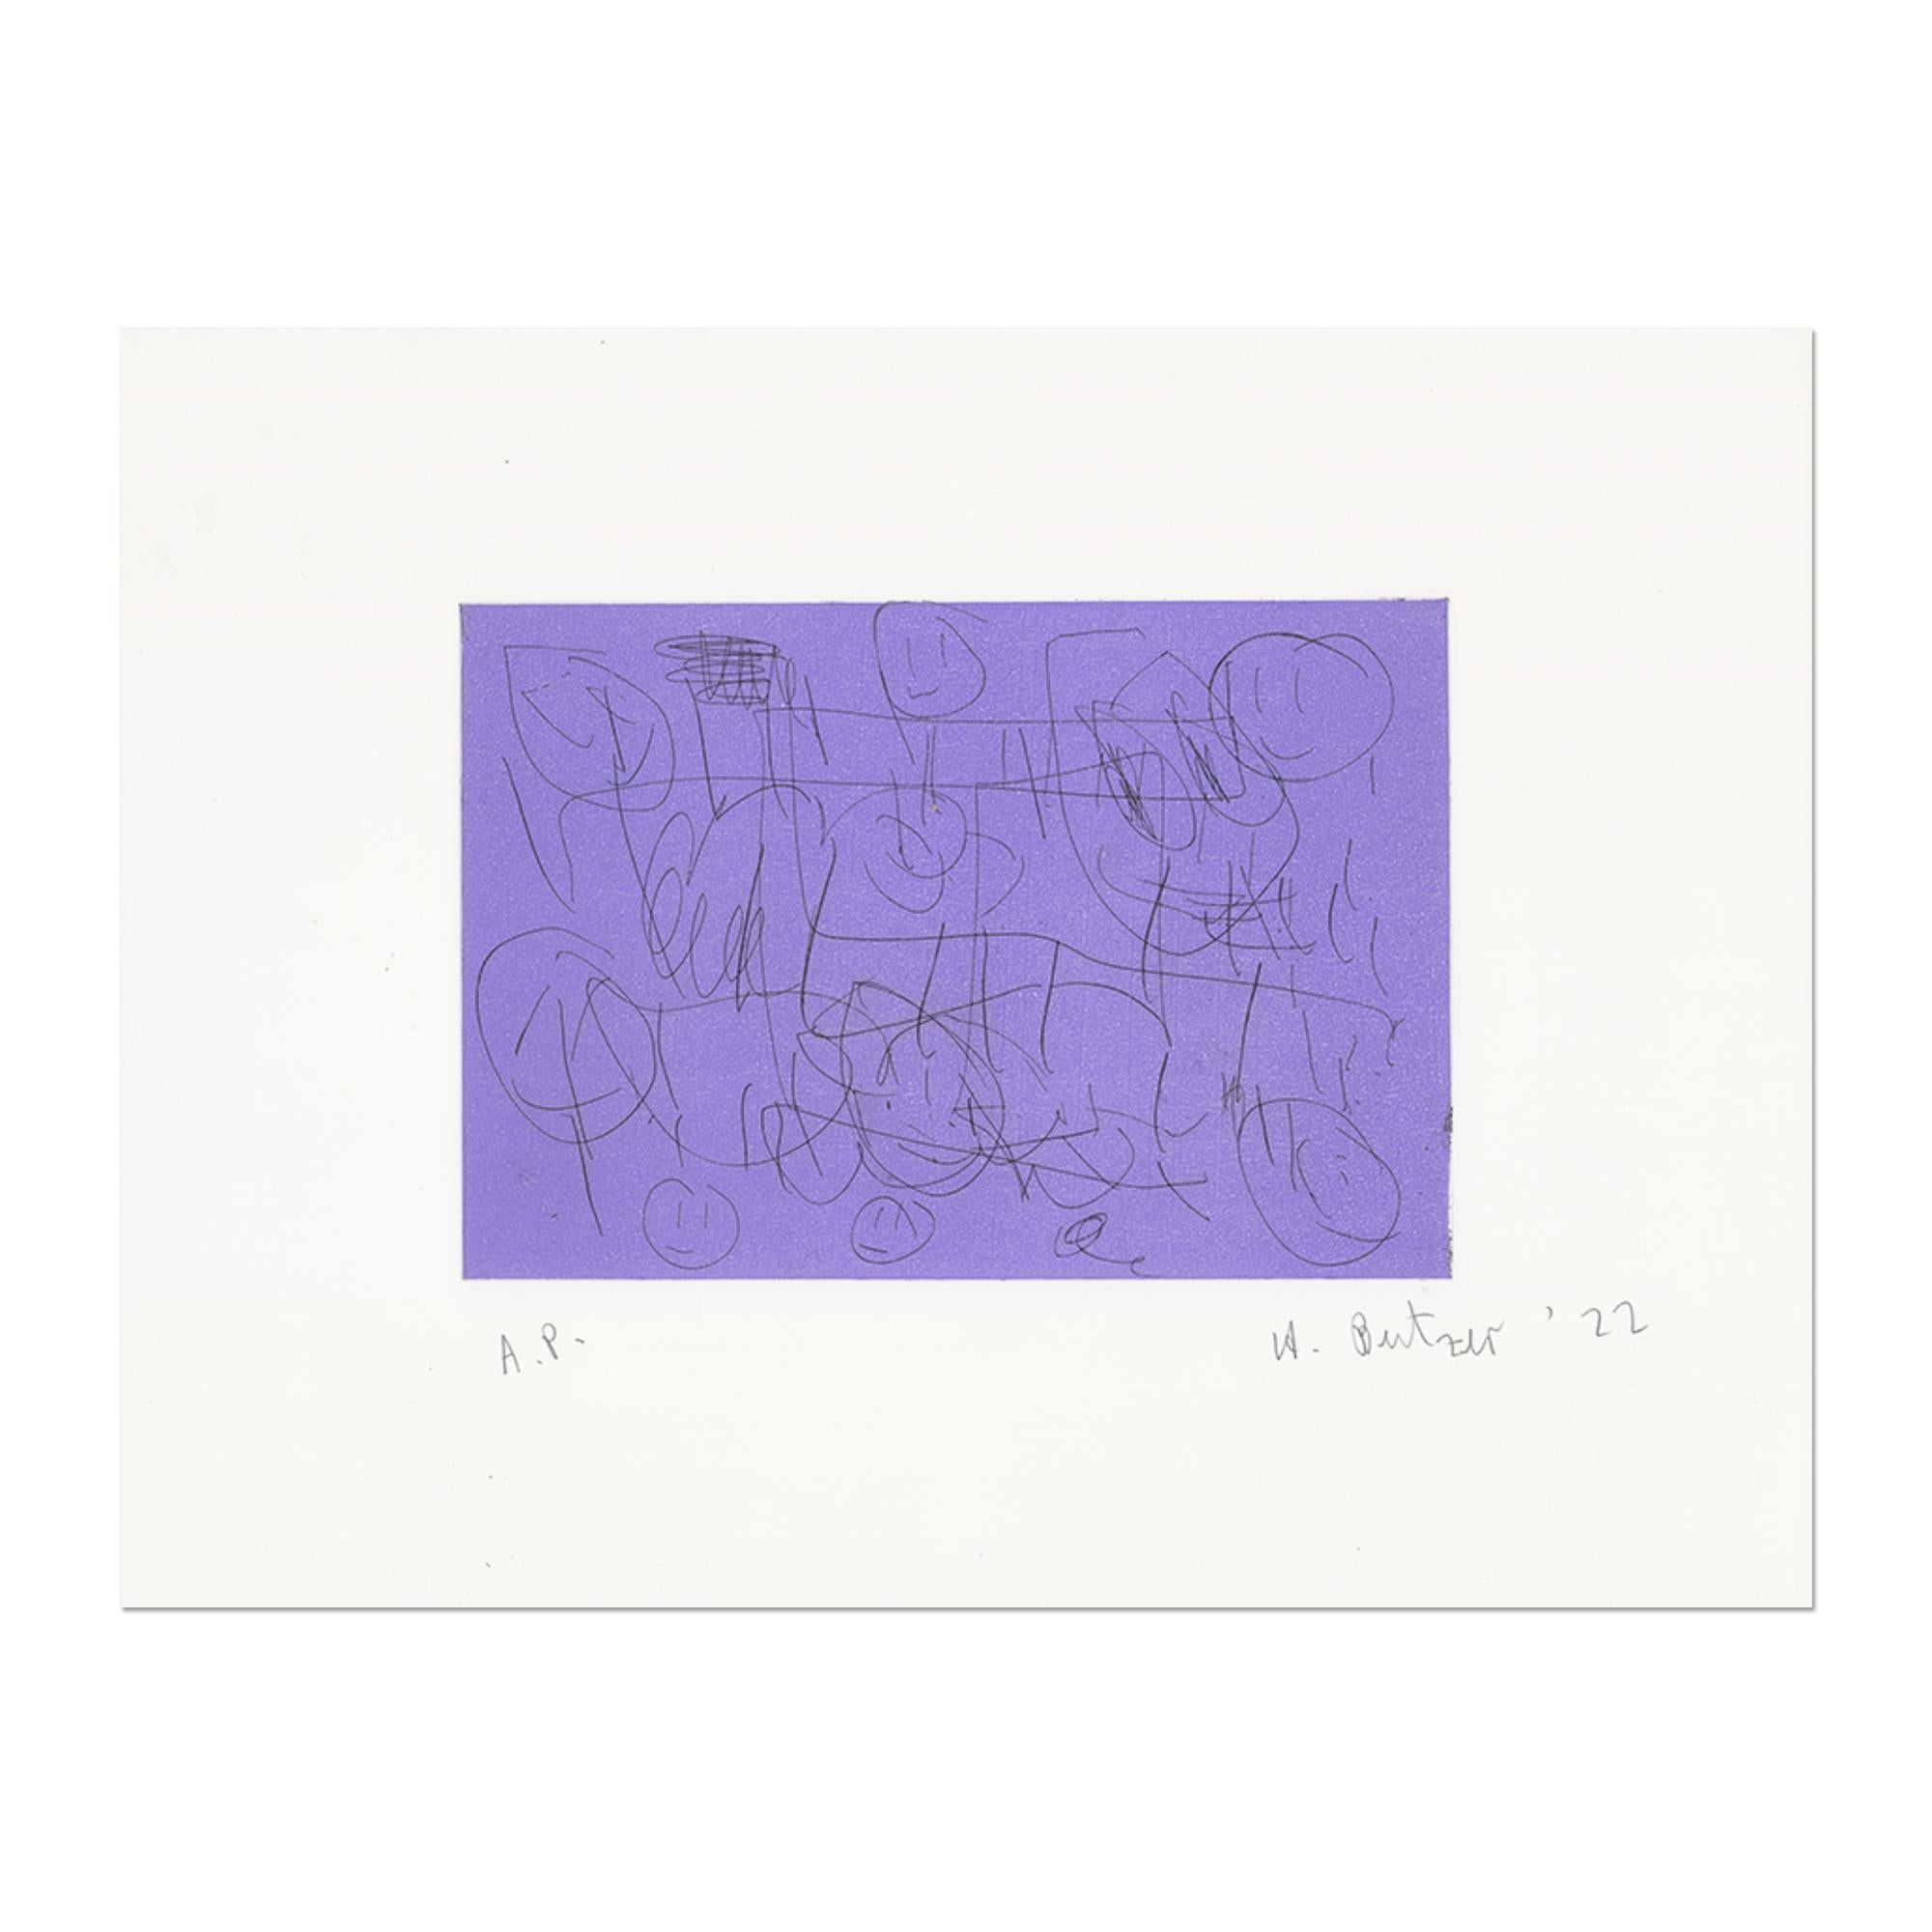 Andr�é Butzer (German, b. 1973)
Untitled, 2019/2022
Medium: Etching in colors on wove paper
Dimensions: 33 x 43 cm
Edition of 15: Hand-signed, numbered and dated in pencil
Condition: Mint